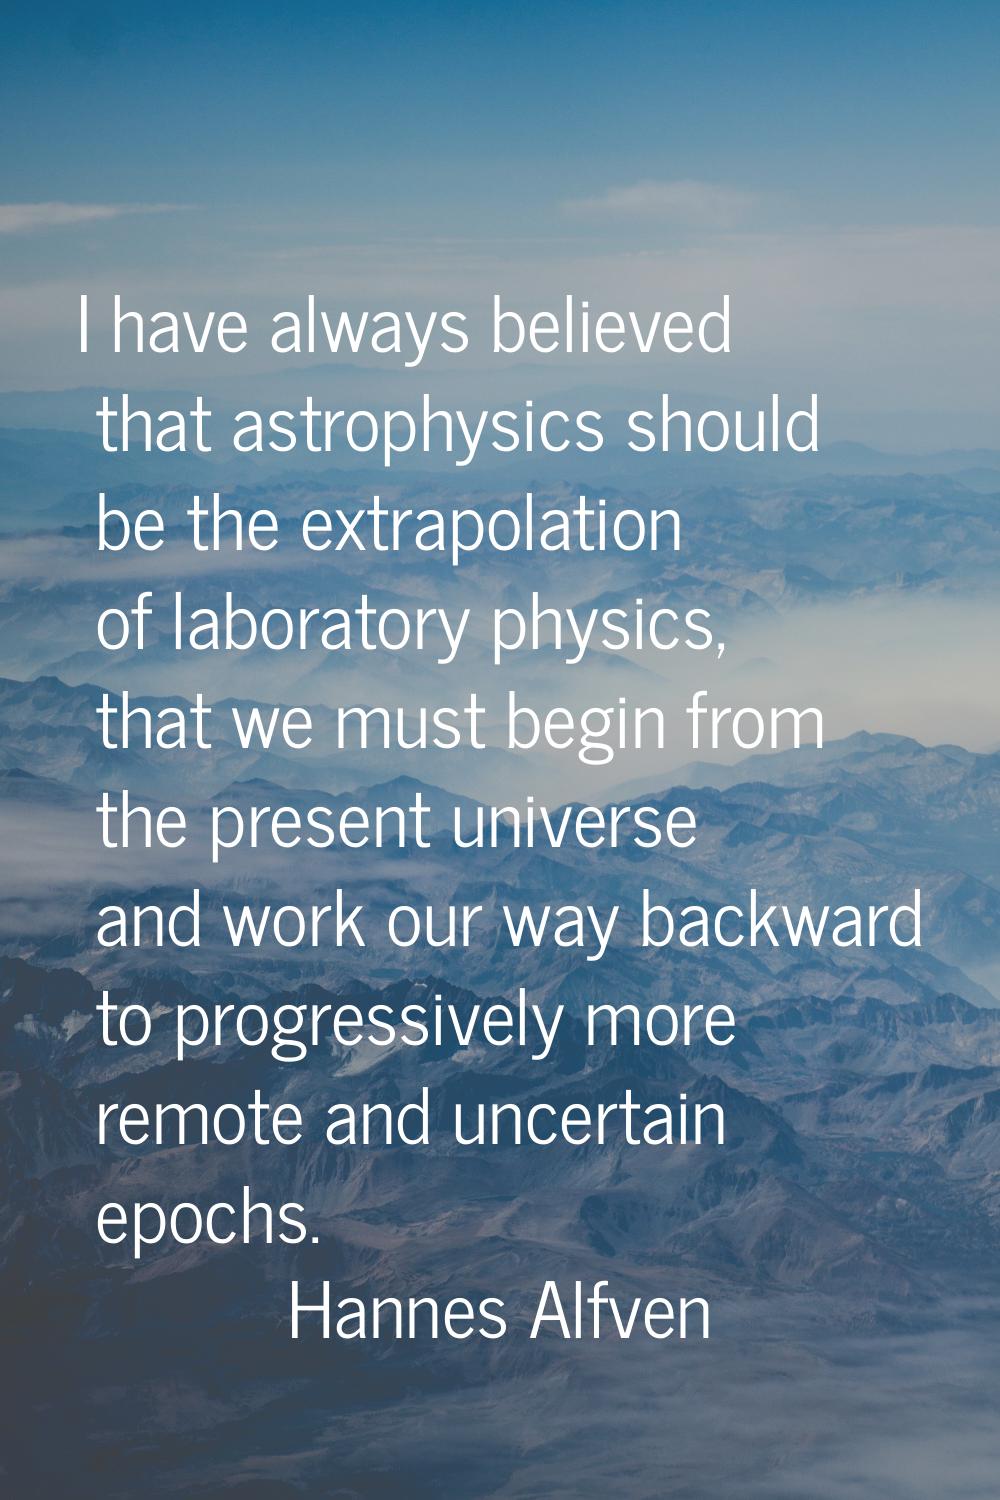 I have always believed that astrophysics should be the extrapolation of laboratory physics, that we